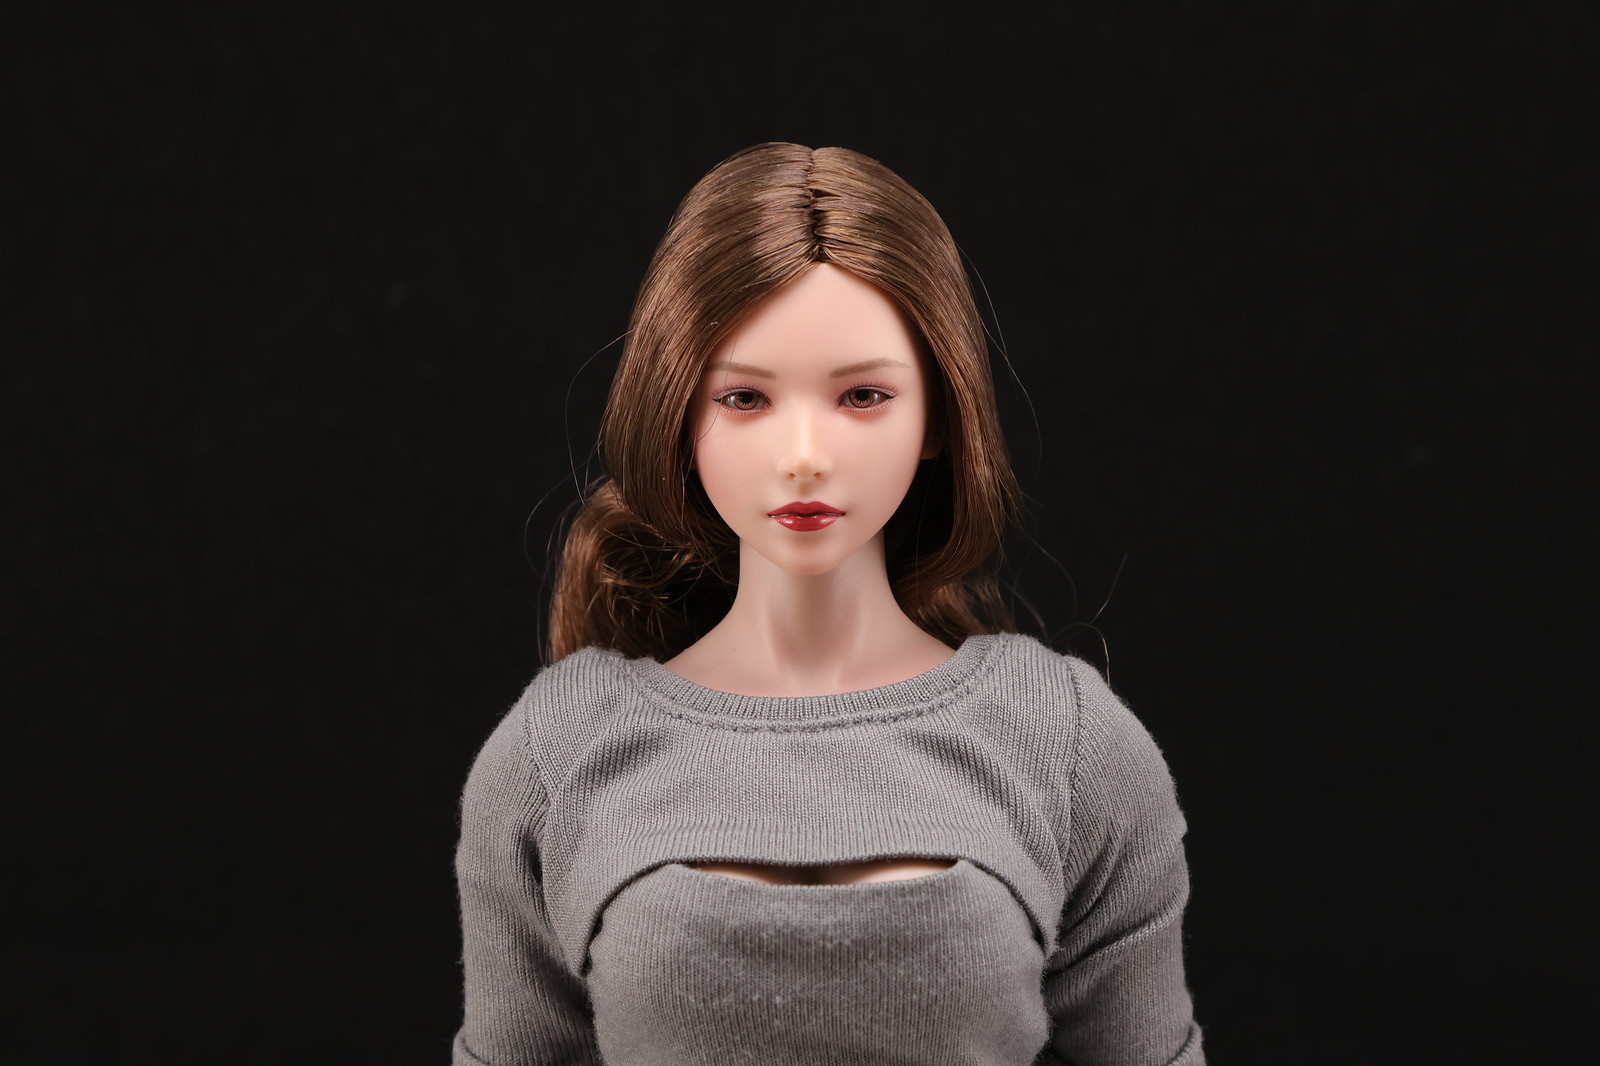 female - NEW PRODUCT: i8TOYS "Xiaoqi Yuki" Movable Eyeball Head Sculpture (I8-H003) - Page 3 53154230730_c475674410_h